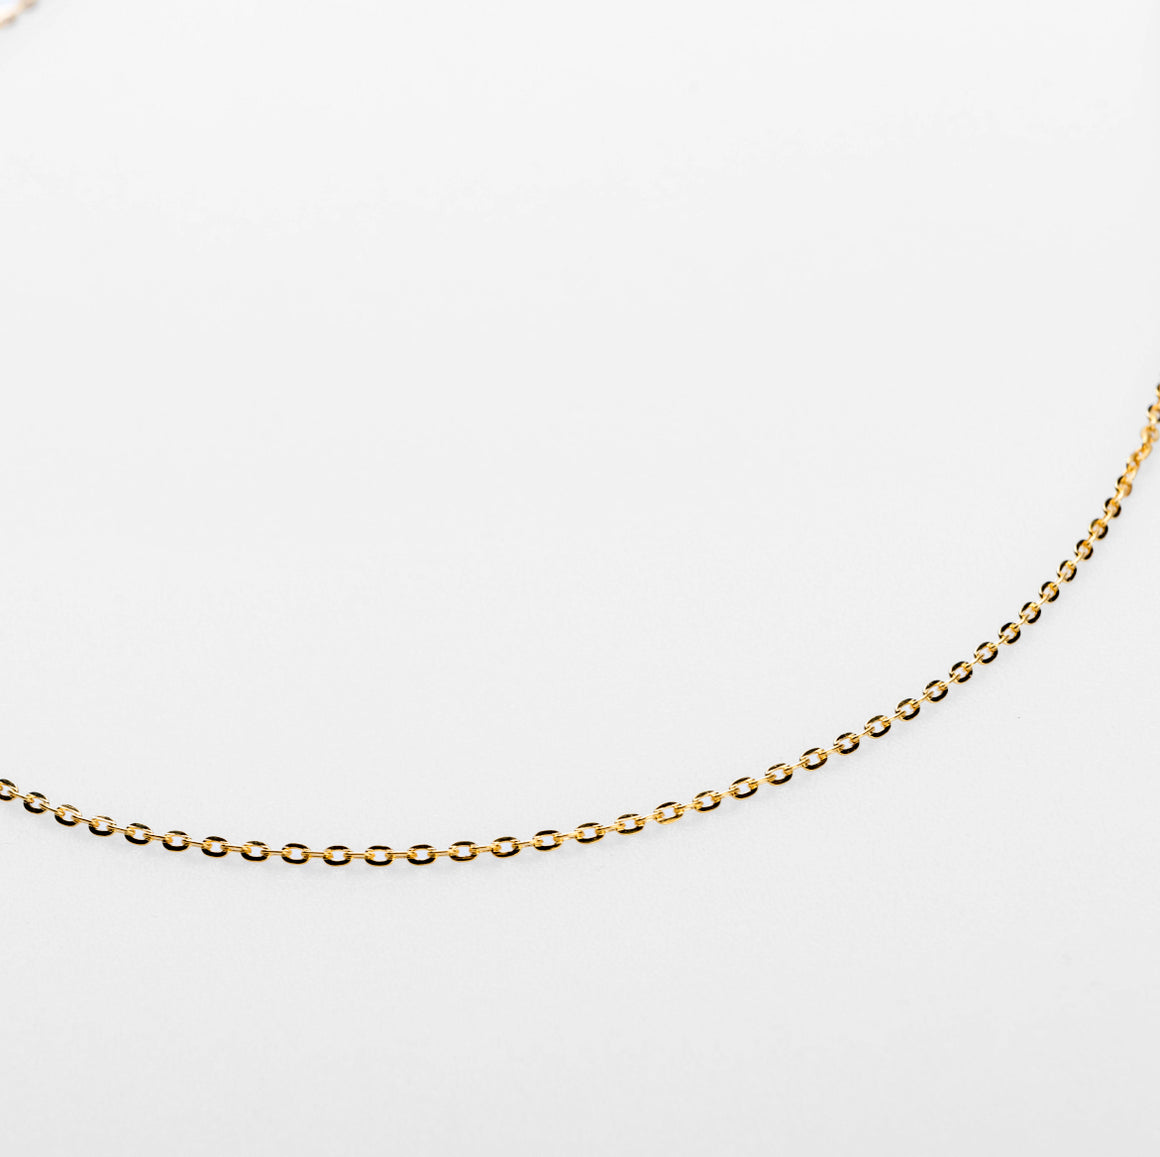 54 FLORAL 2mm CURB NECKLACE CHAIN - GOLD